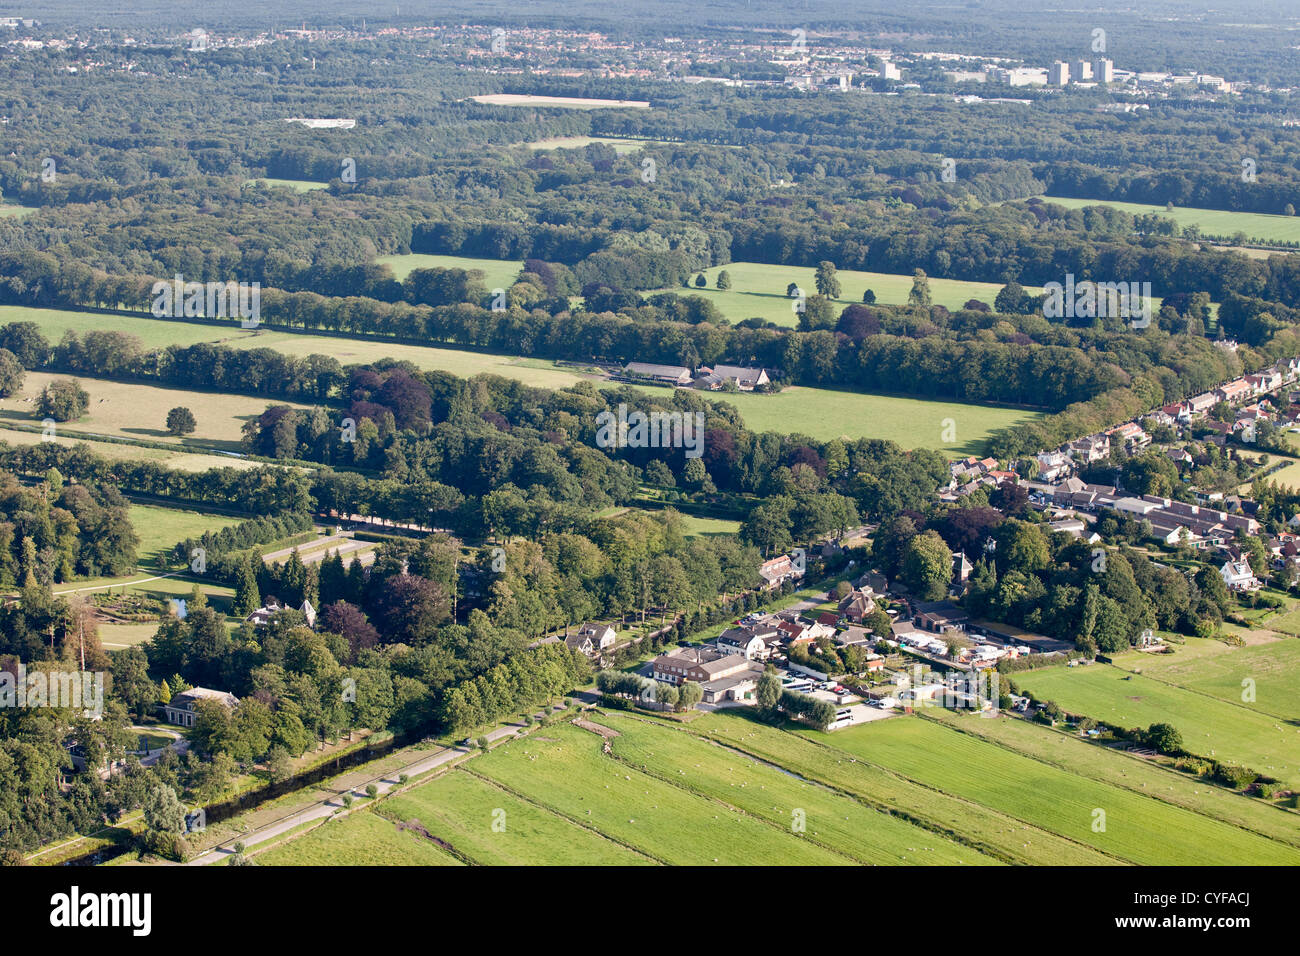 The Netherlands, 's-Graveland, Northern part of  the rural estate areas. Aerial. Stock Photo